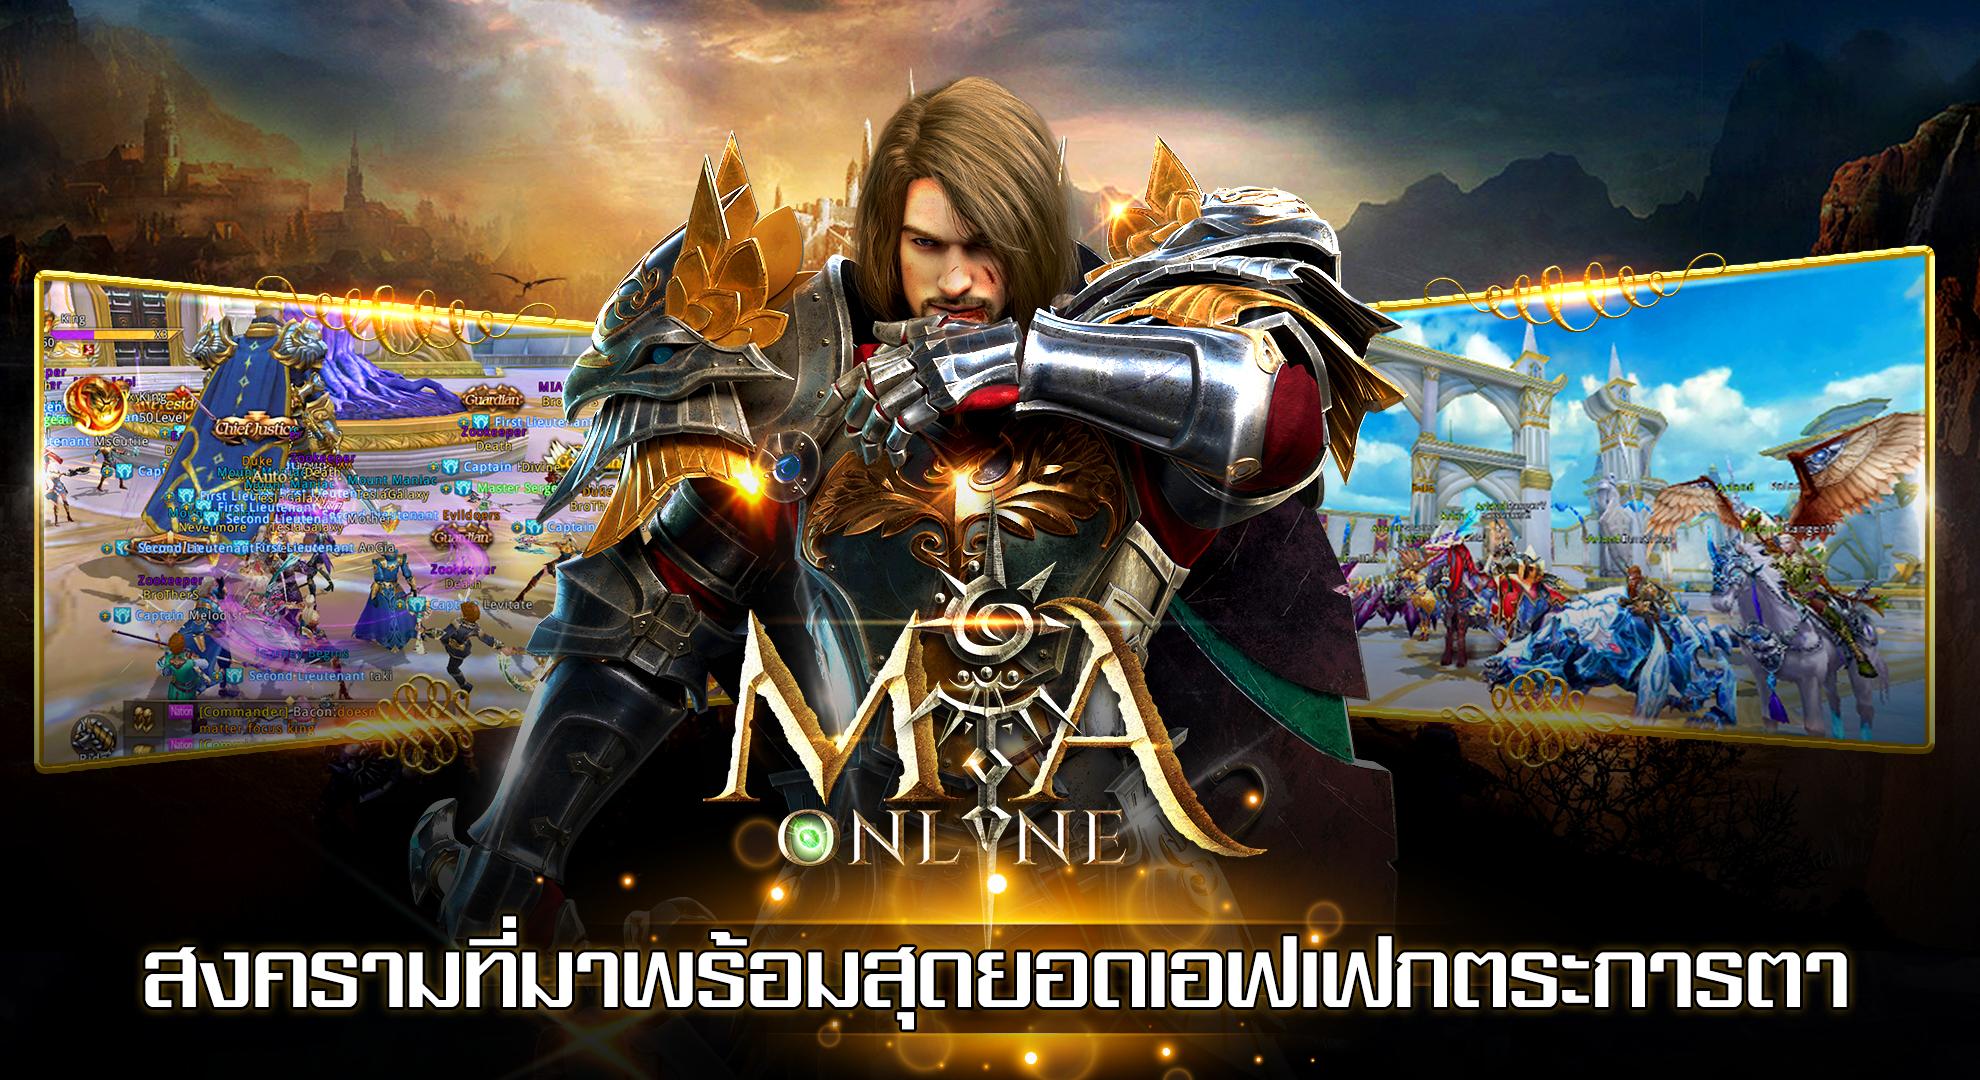 MIA Online TH for Android - APK Download